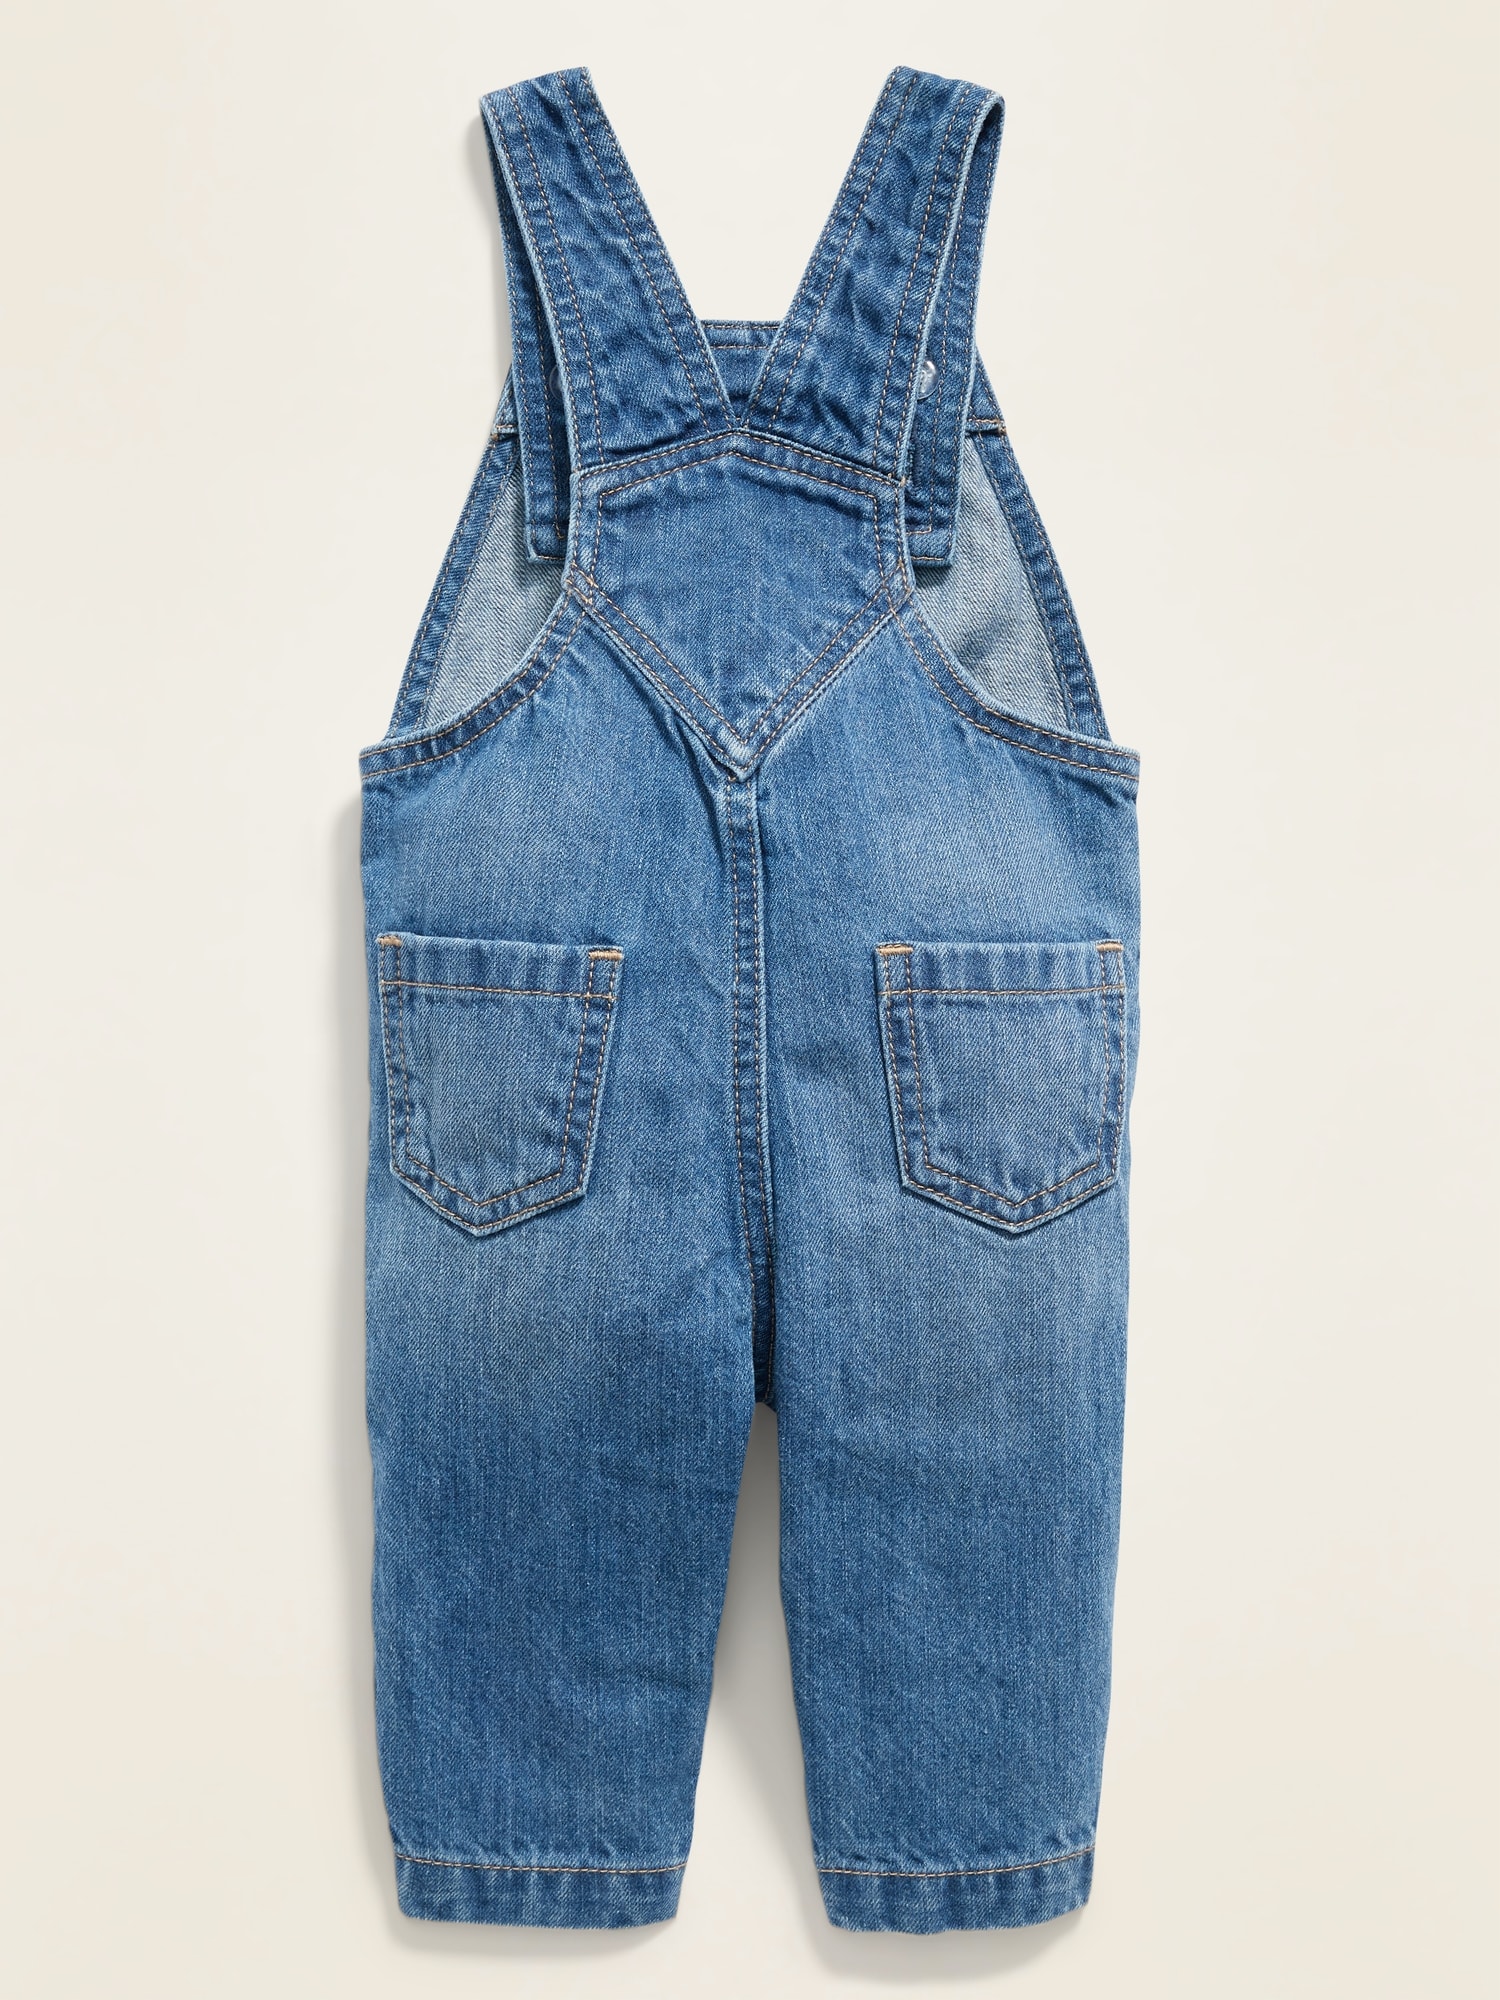 Floral-Embroidered Jean Overalls for Baby | Old Navy